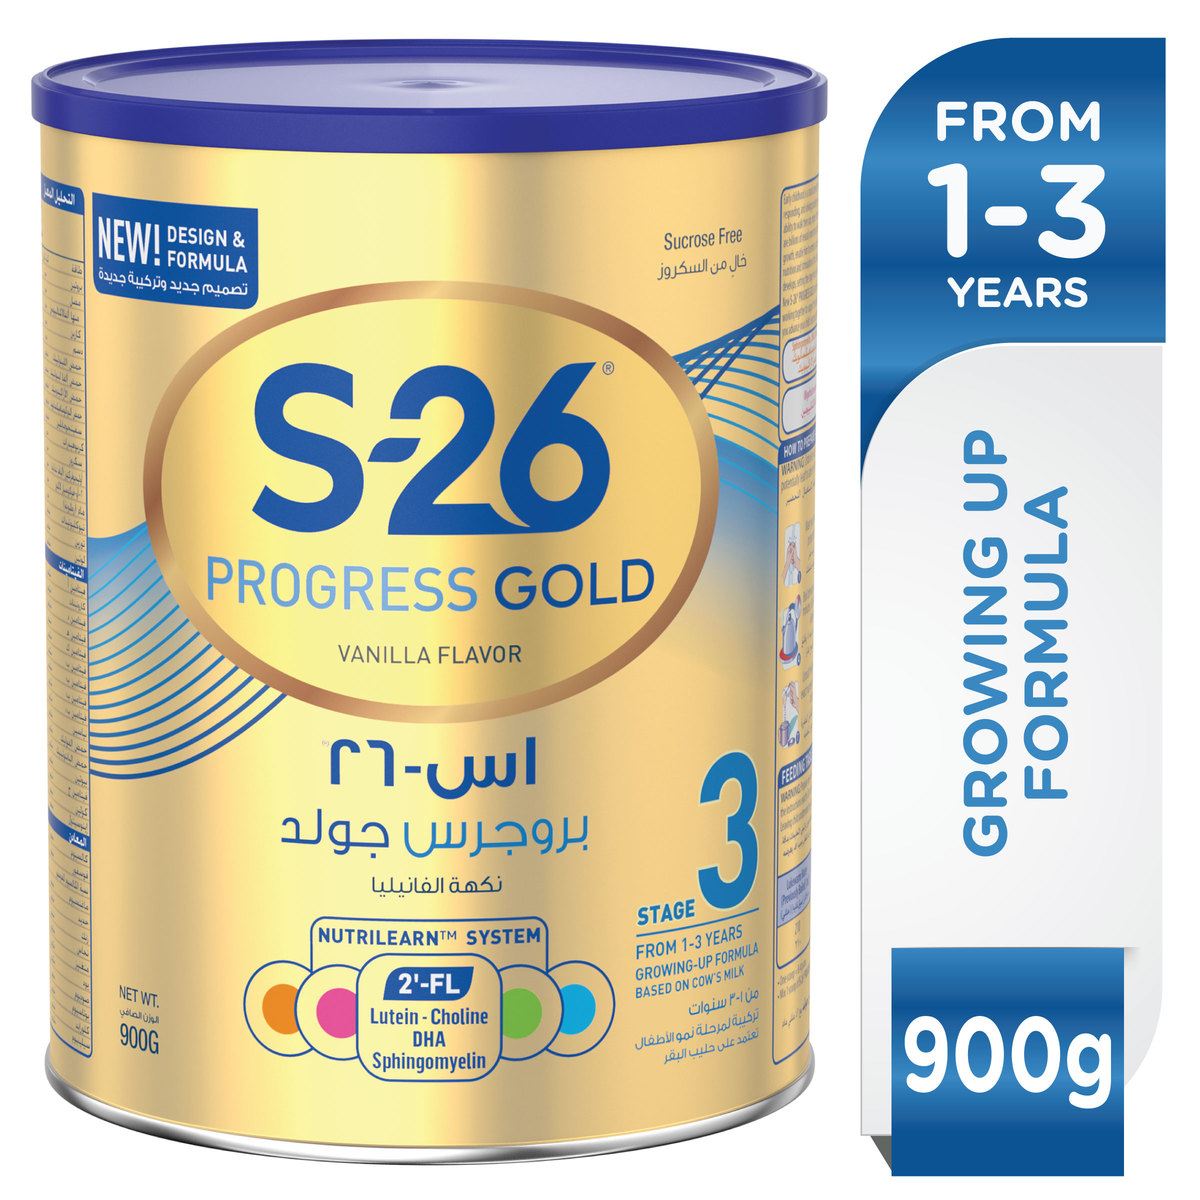 S26 Progress Gold Stage 3 Growing Up Formula From 1-3 Years 900g